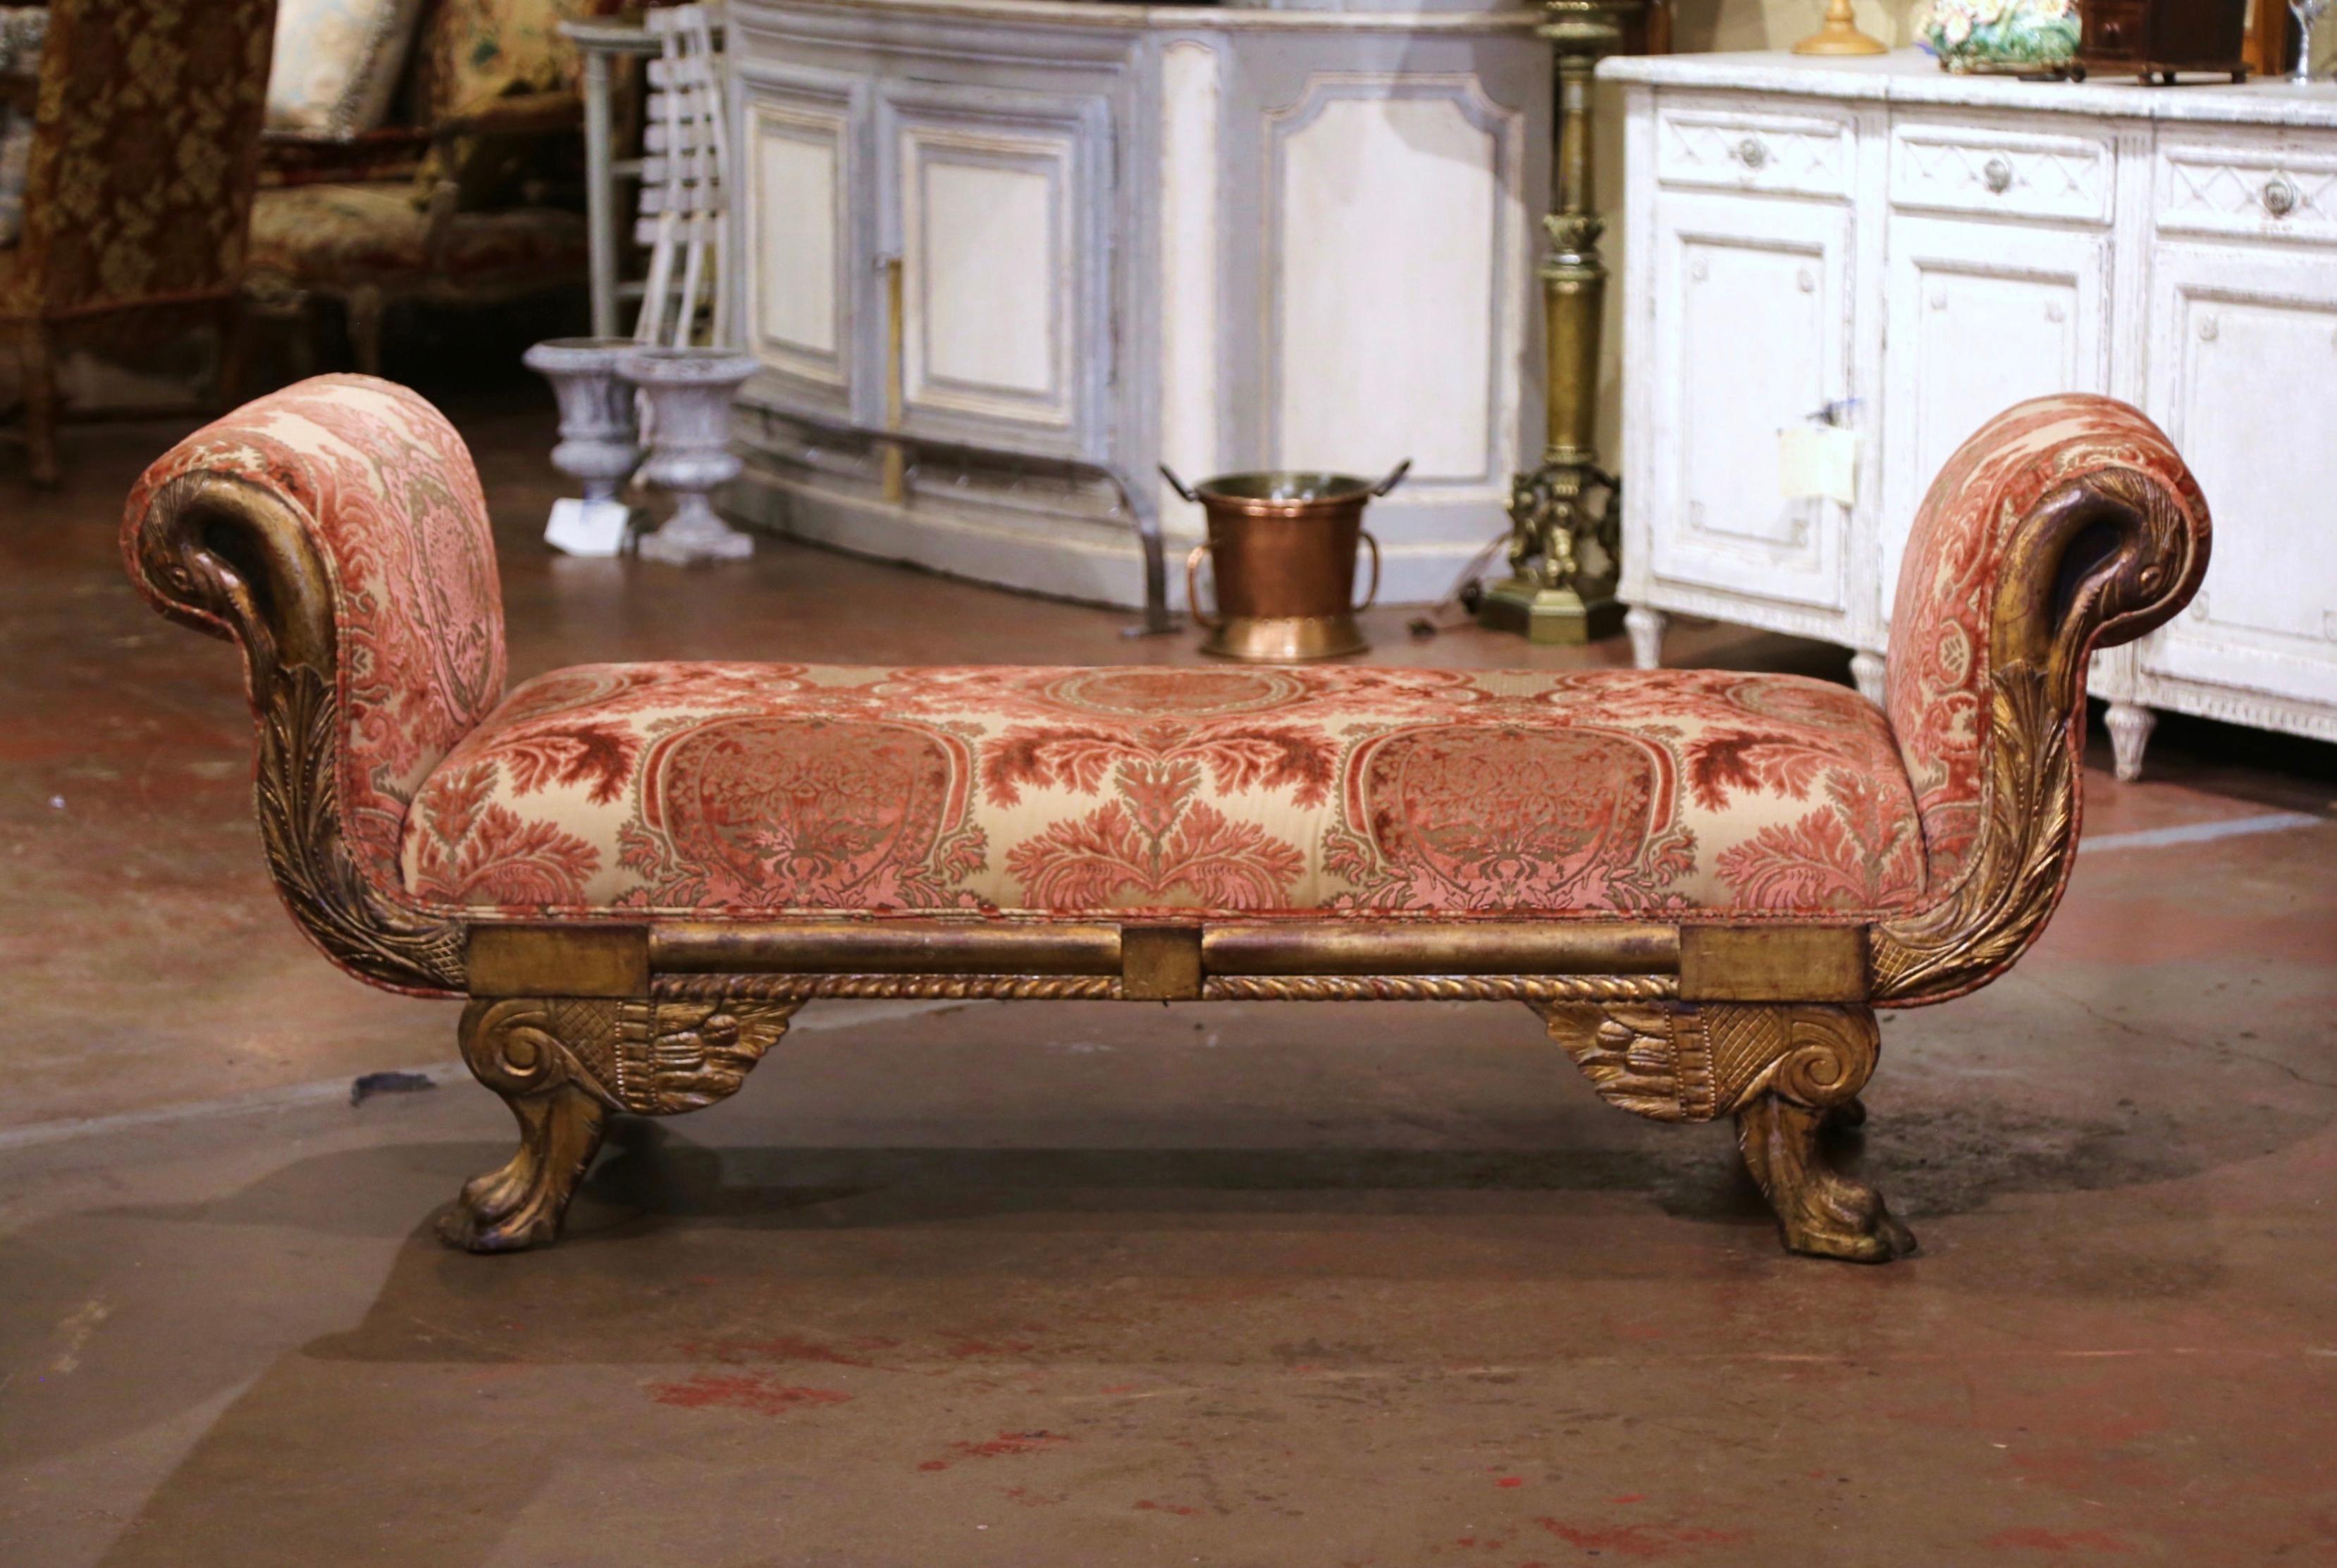 19th Century Italian Carved Gilt Wood and Velvet Daybed with Swan Motifs 4